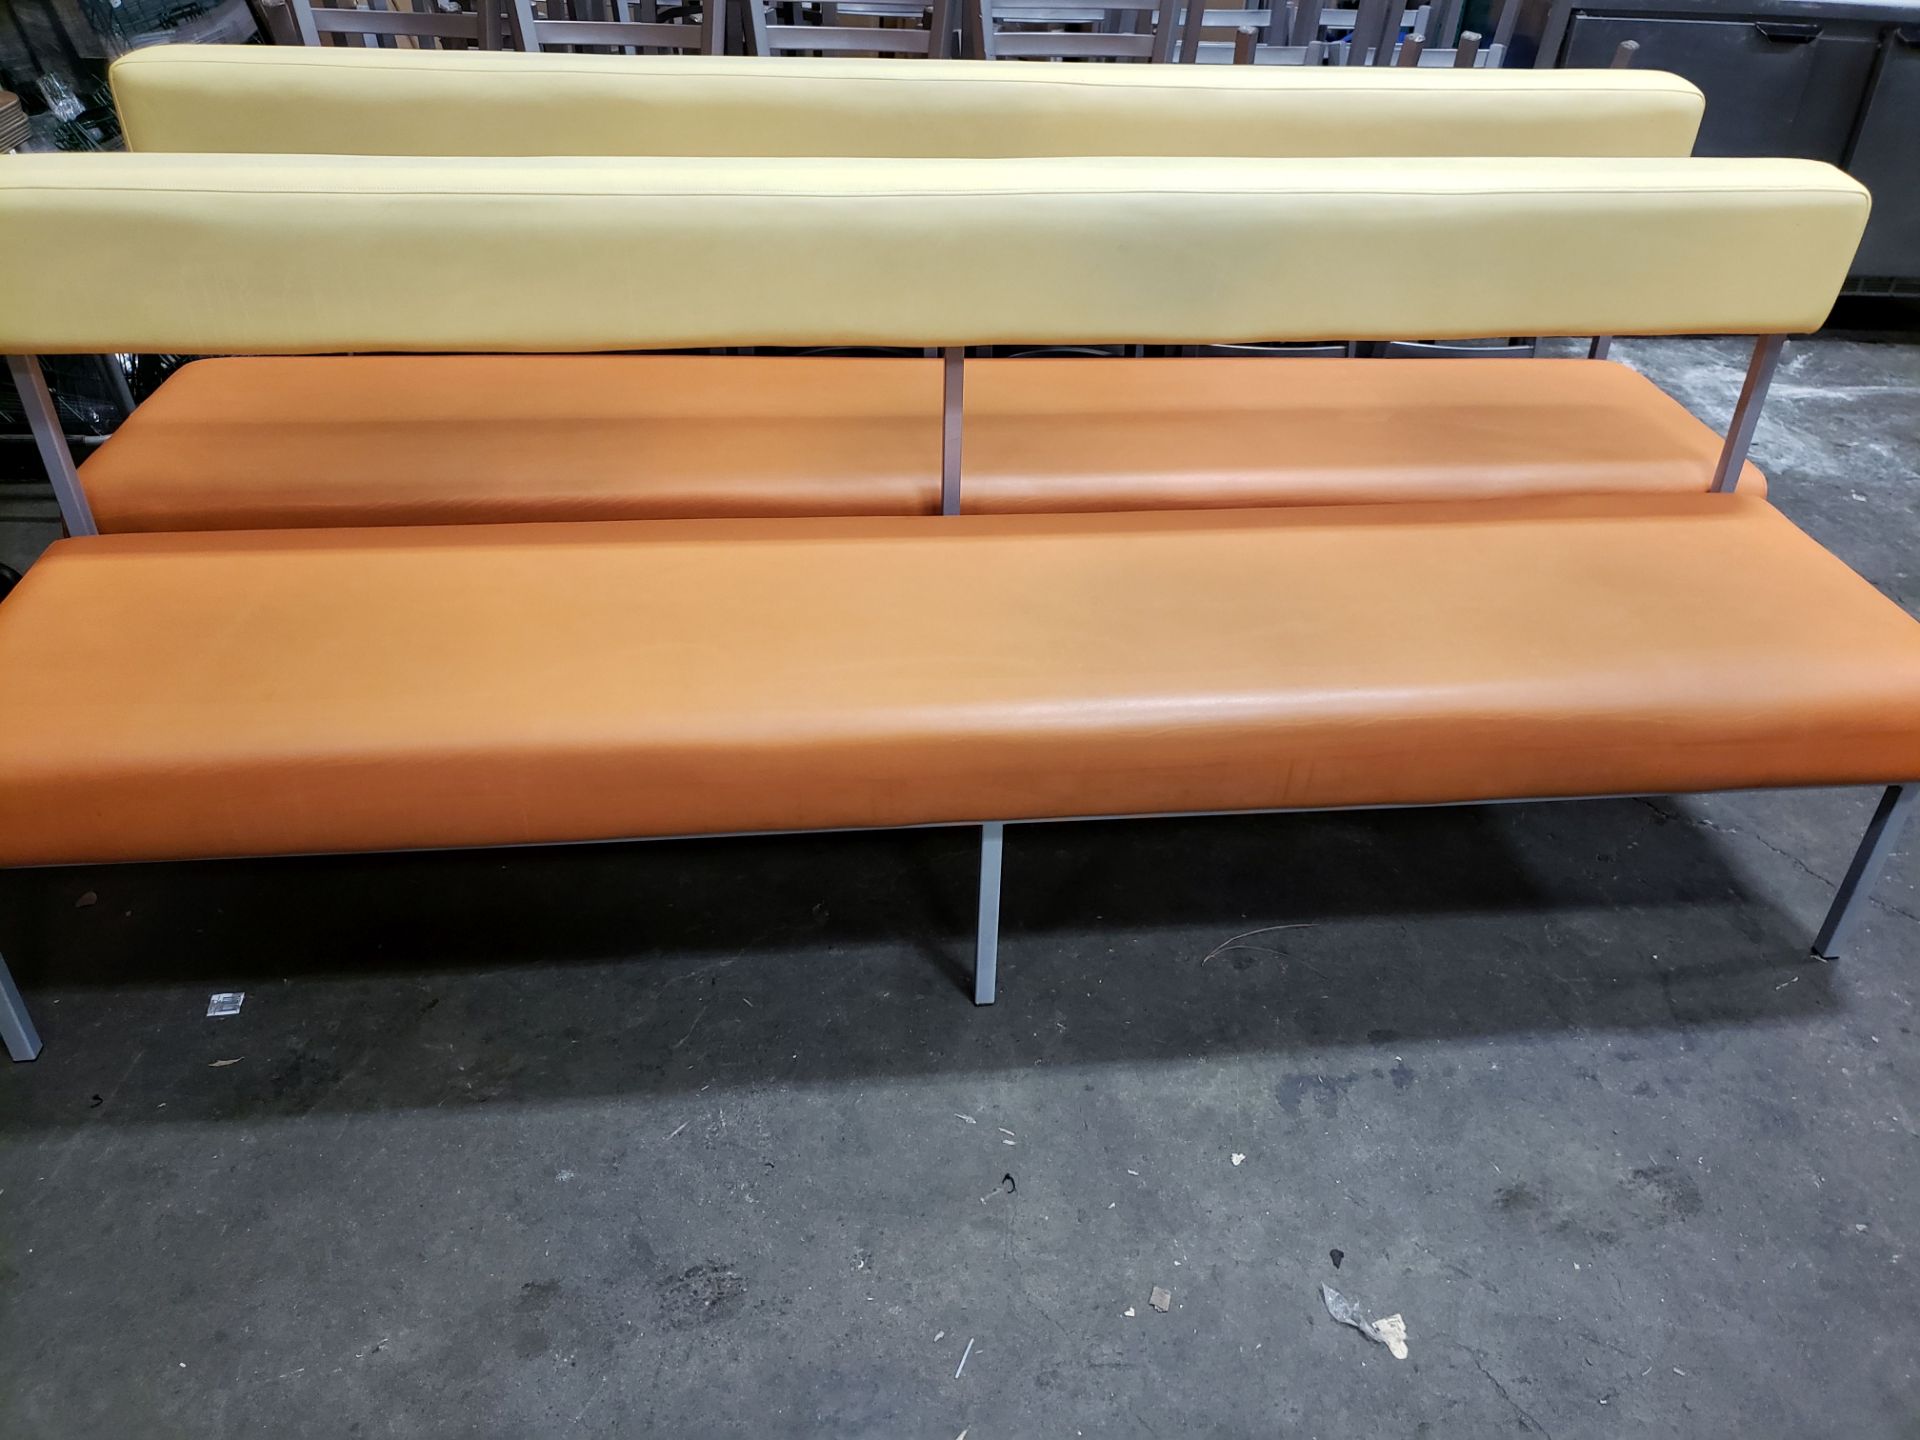 Metal Frame Bench Seating with Padded Seat & Back - 97" Long - Lot of 2 - Image 4 of 4